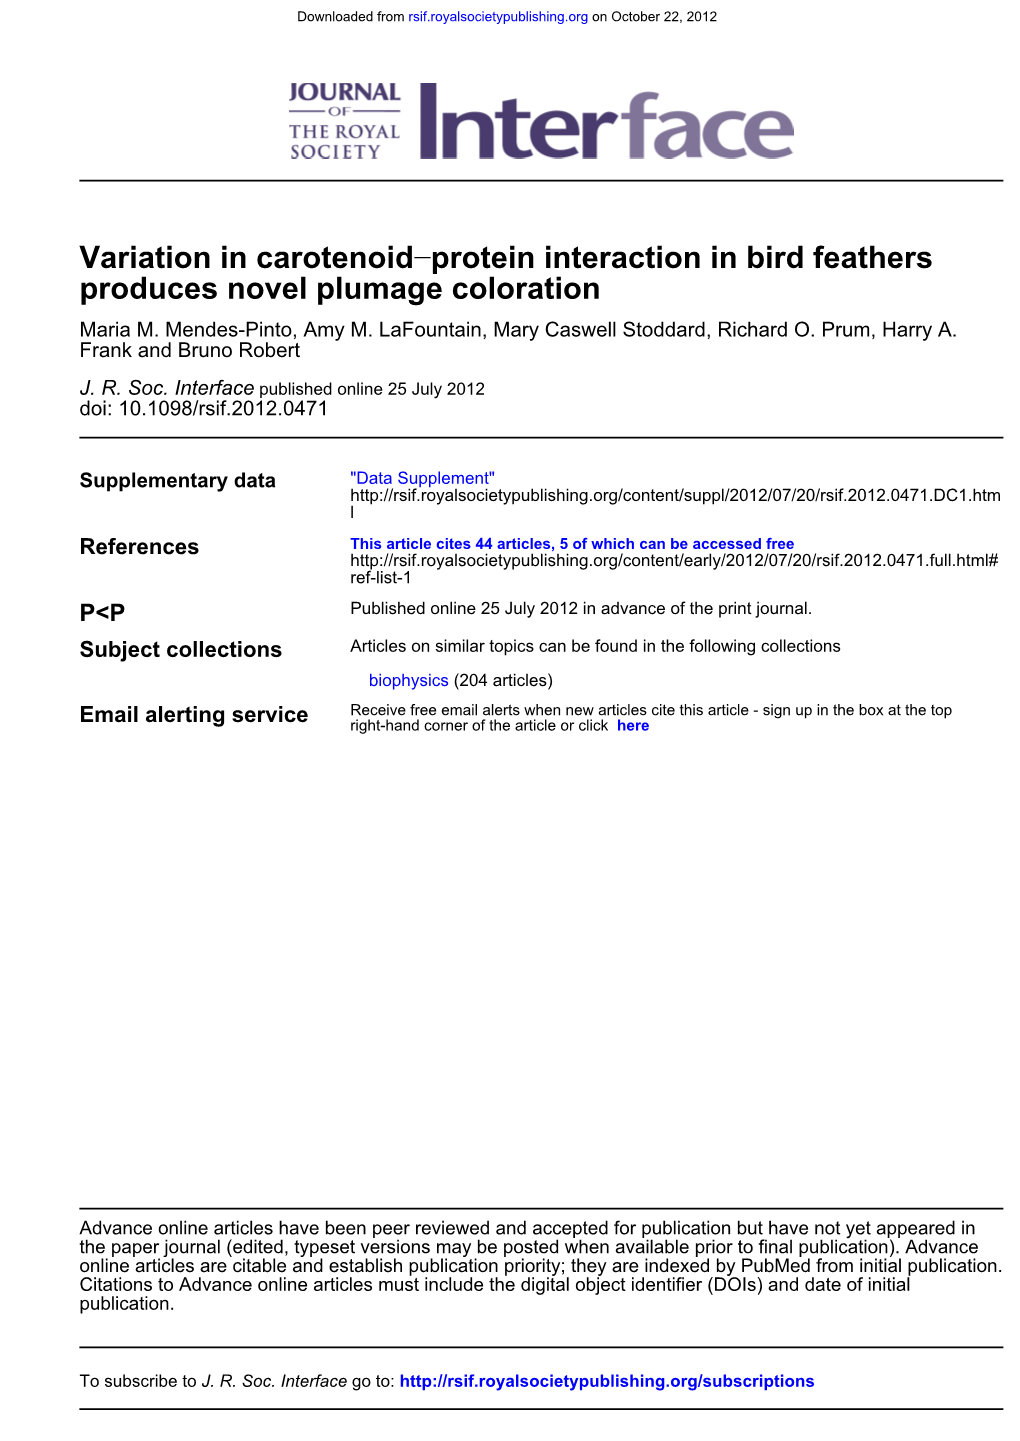 Variation in Carotenoid−Protein Interaction in Bird Feathers Produces Novel Plumage Coloration